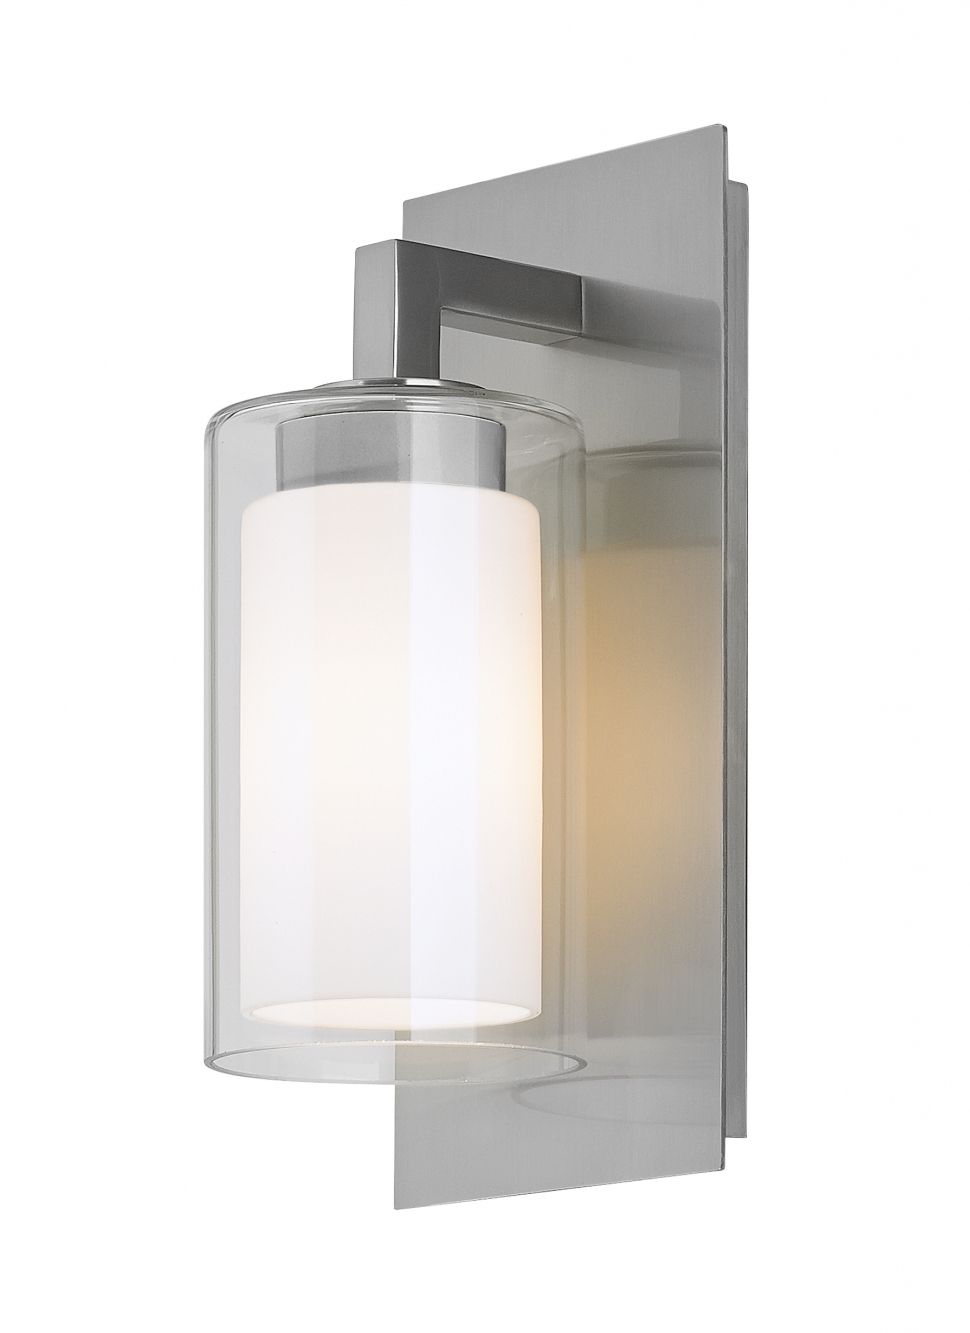 Outdoor Ceiling Light With Electrical Outlet With Regard To Well Known Electrical Wiring : Electrical Wires & Cables Outdoor Ceiling Light (View 14 of 20)